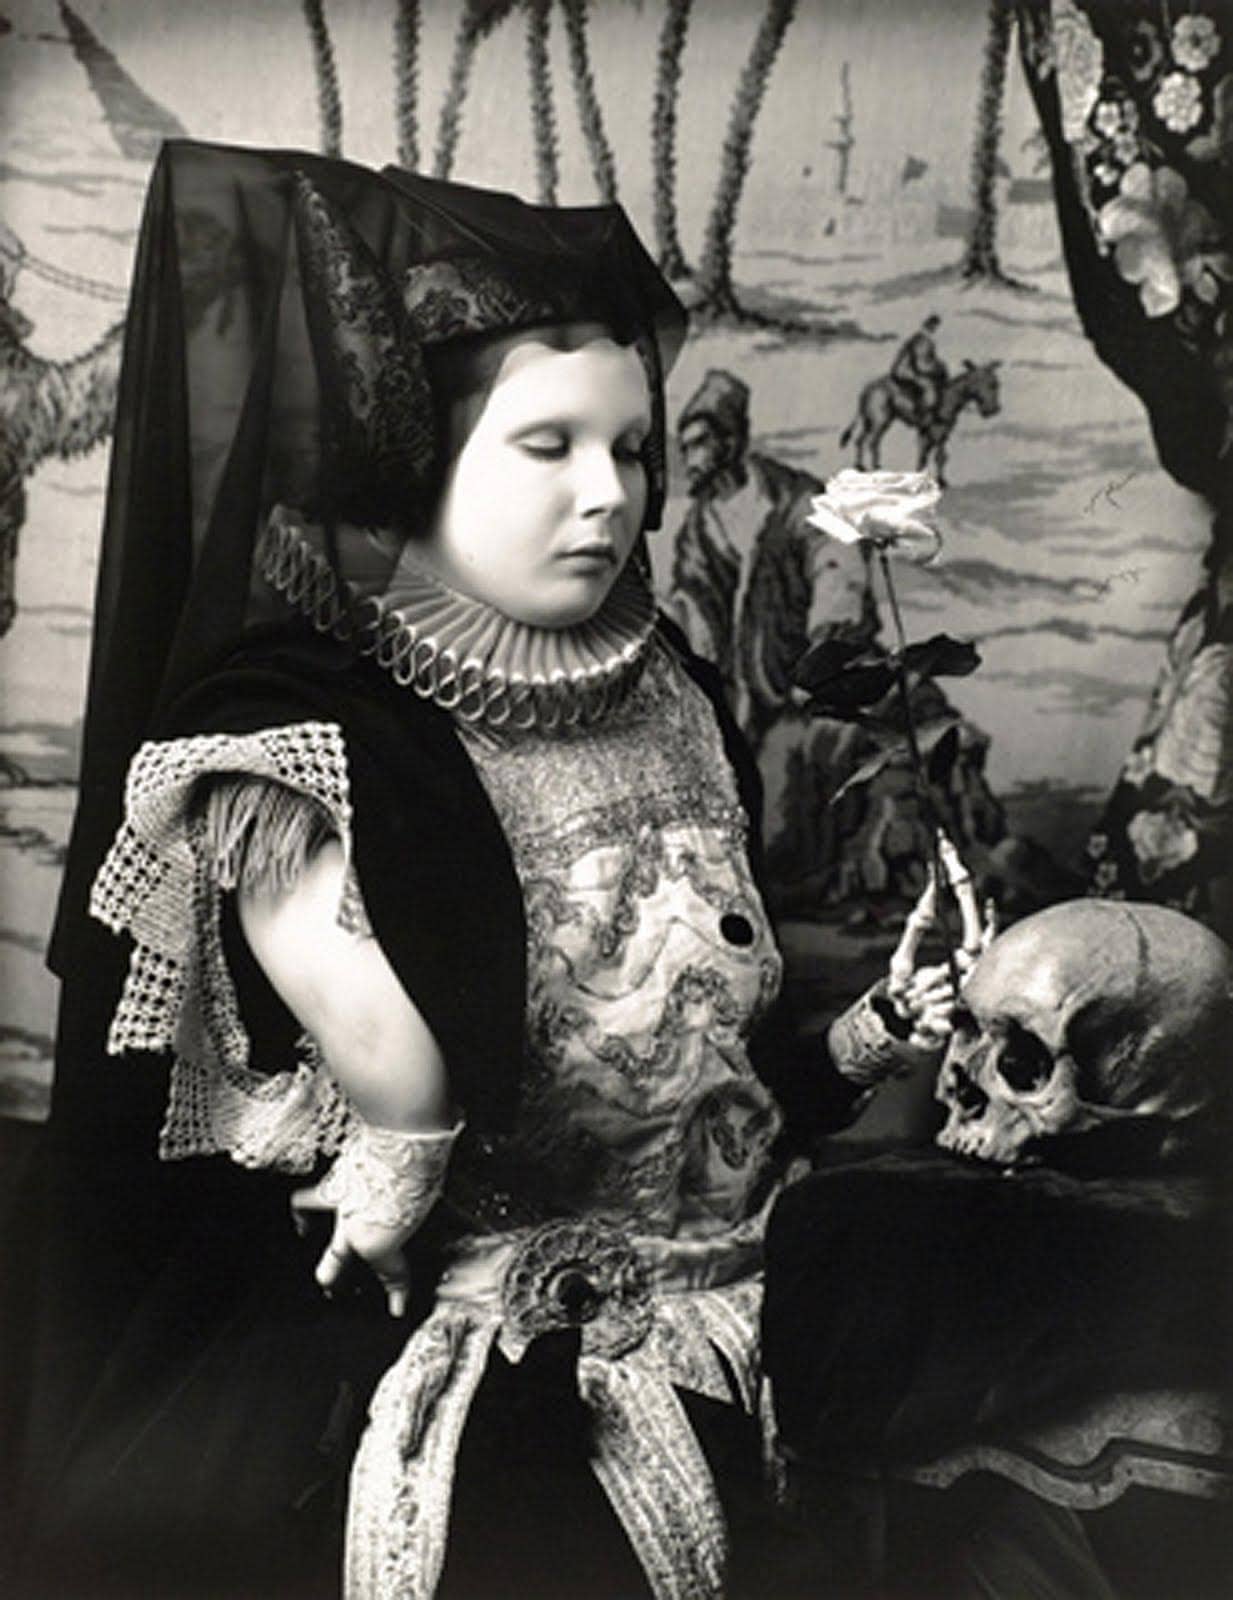 History of White World : Arabia, 2008, Joël-Peter Witkin